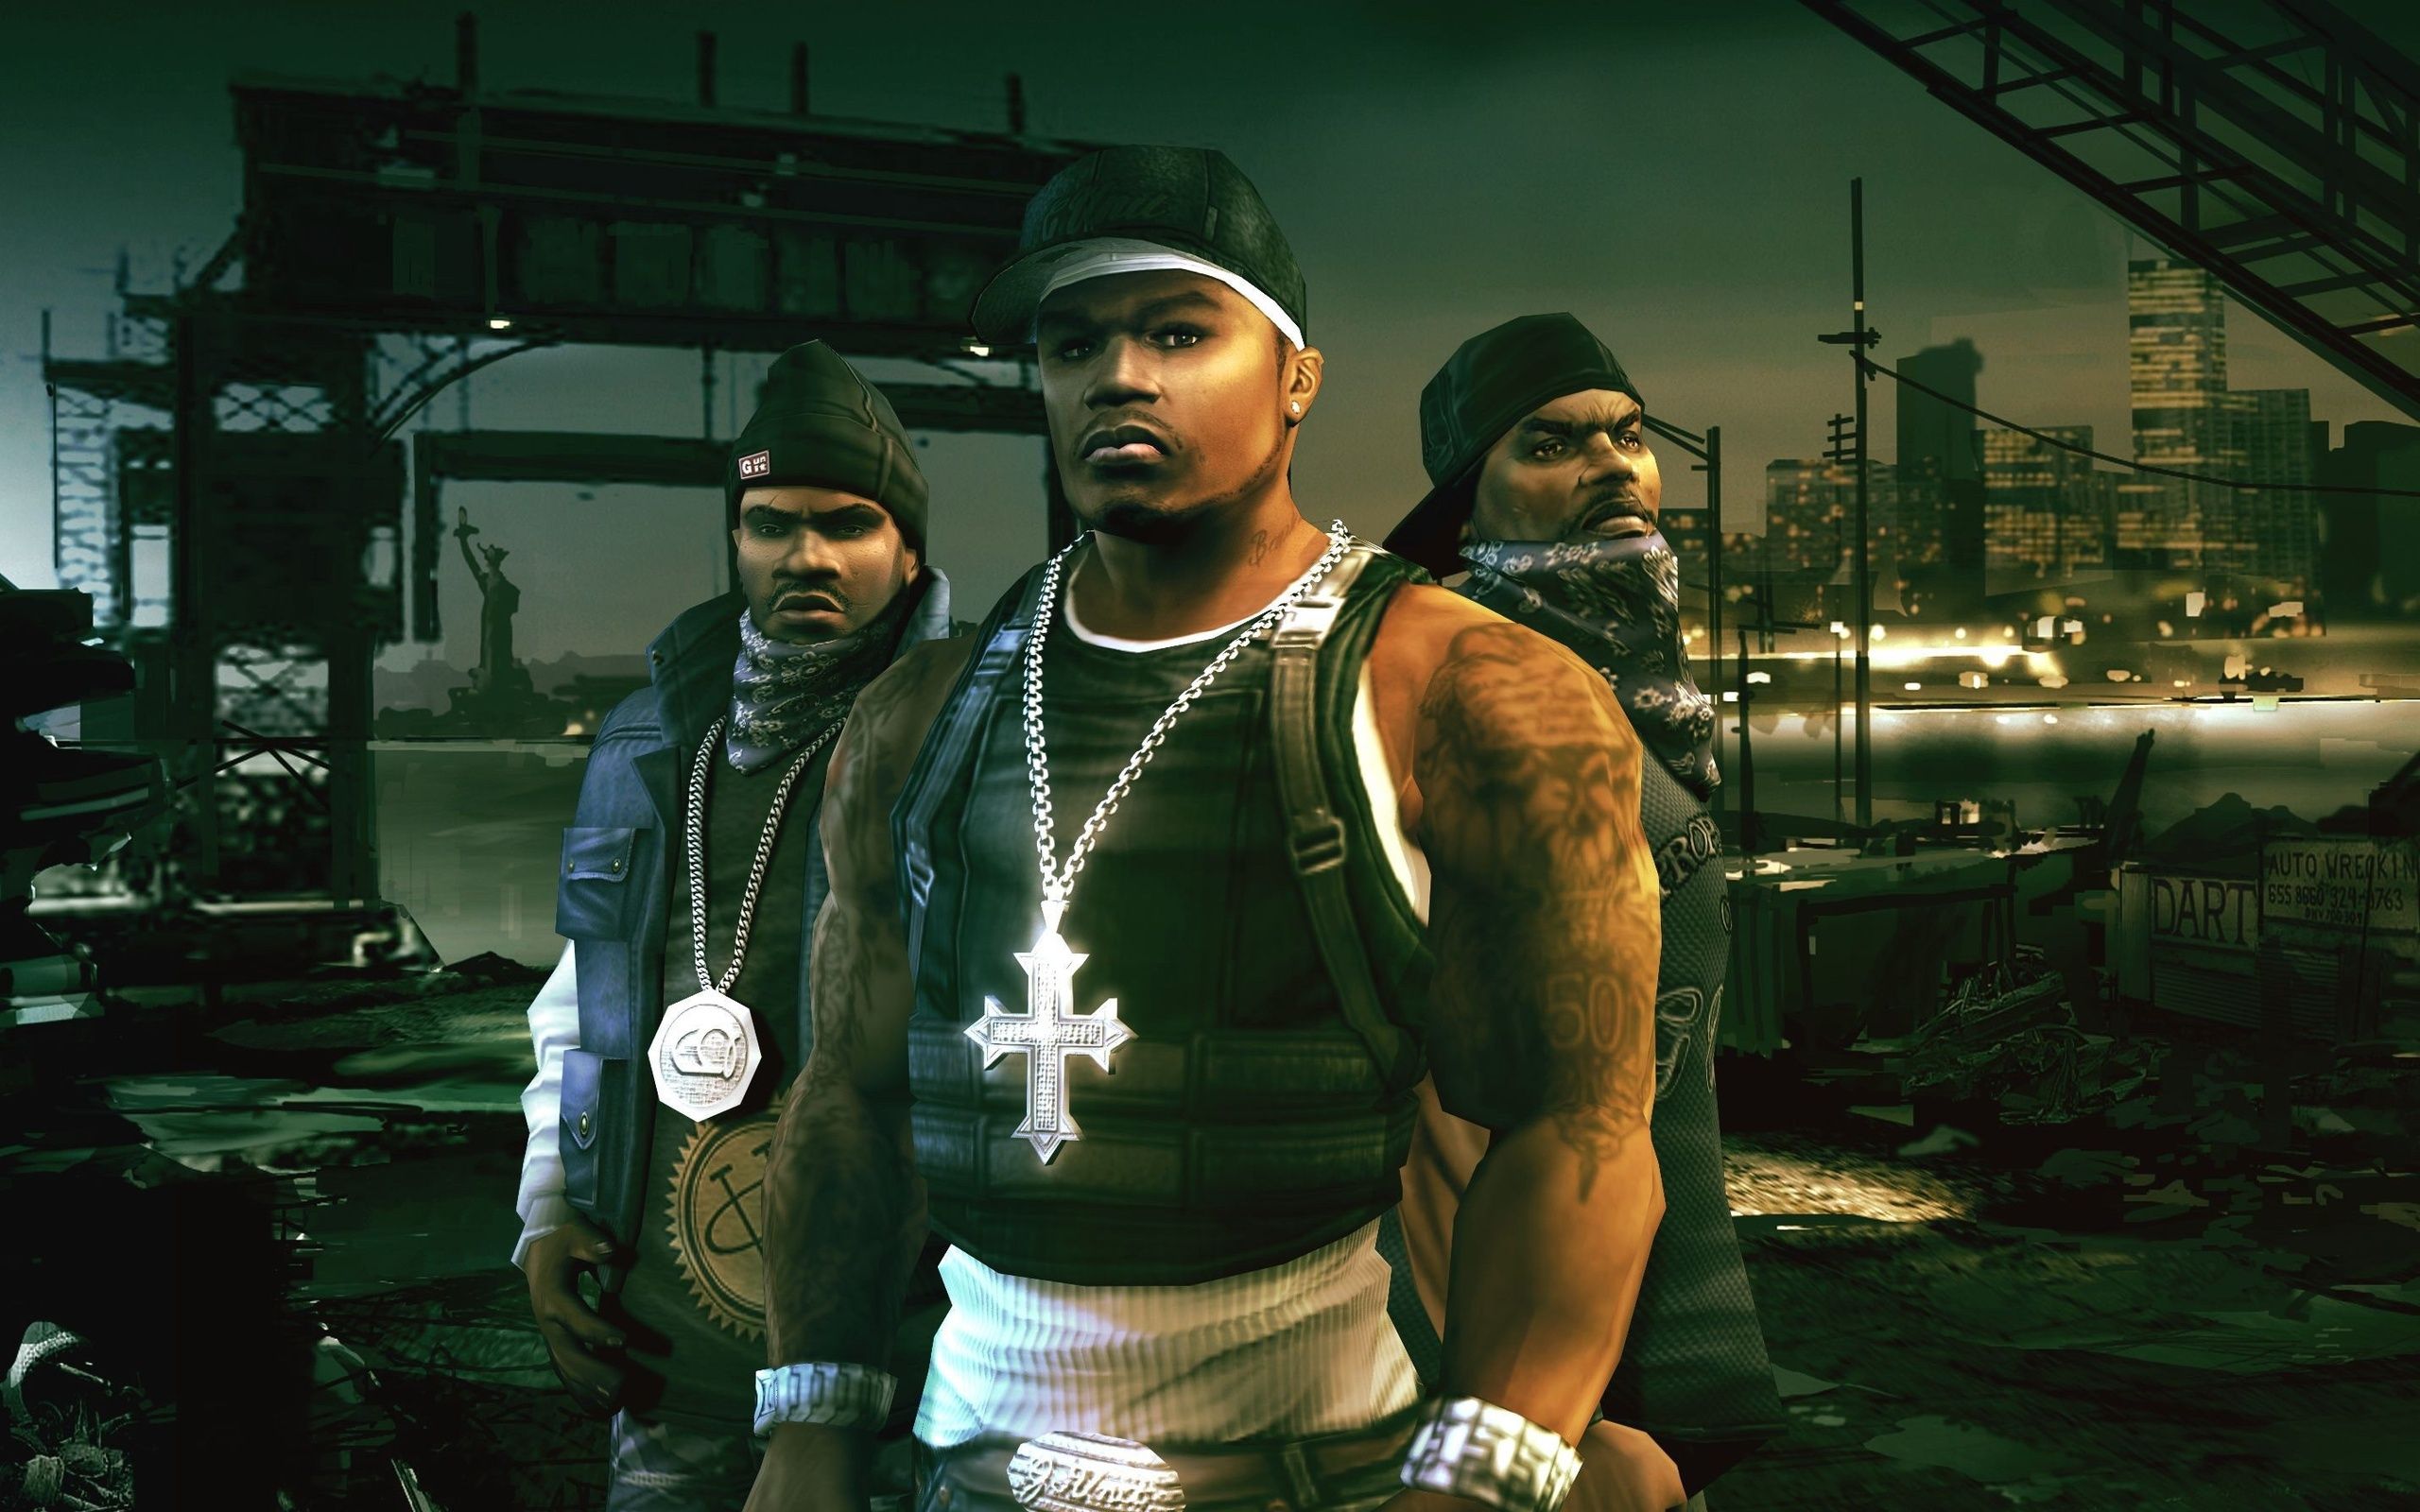 Discover the 50 Cent Video Game